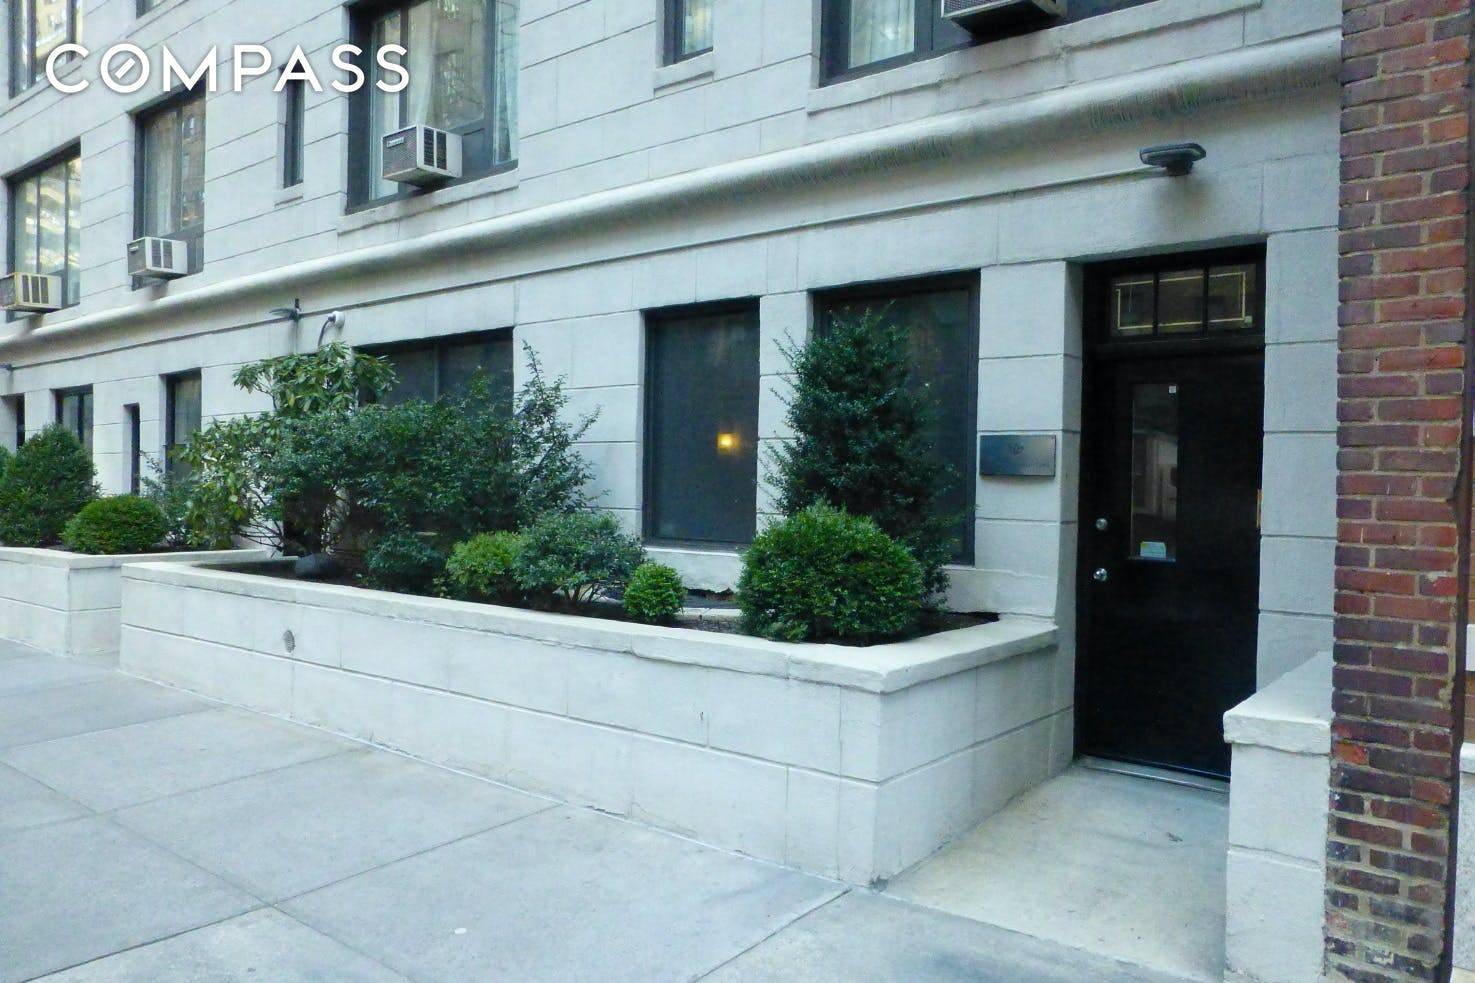 Outstanding opportunity to buy an impeccable medical office coop in Manhattan's most prestigious neighborhood in the UES.